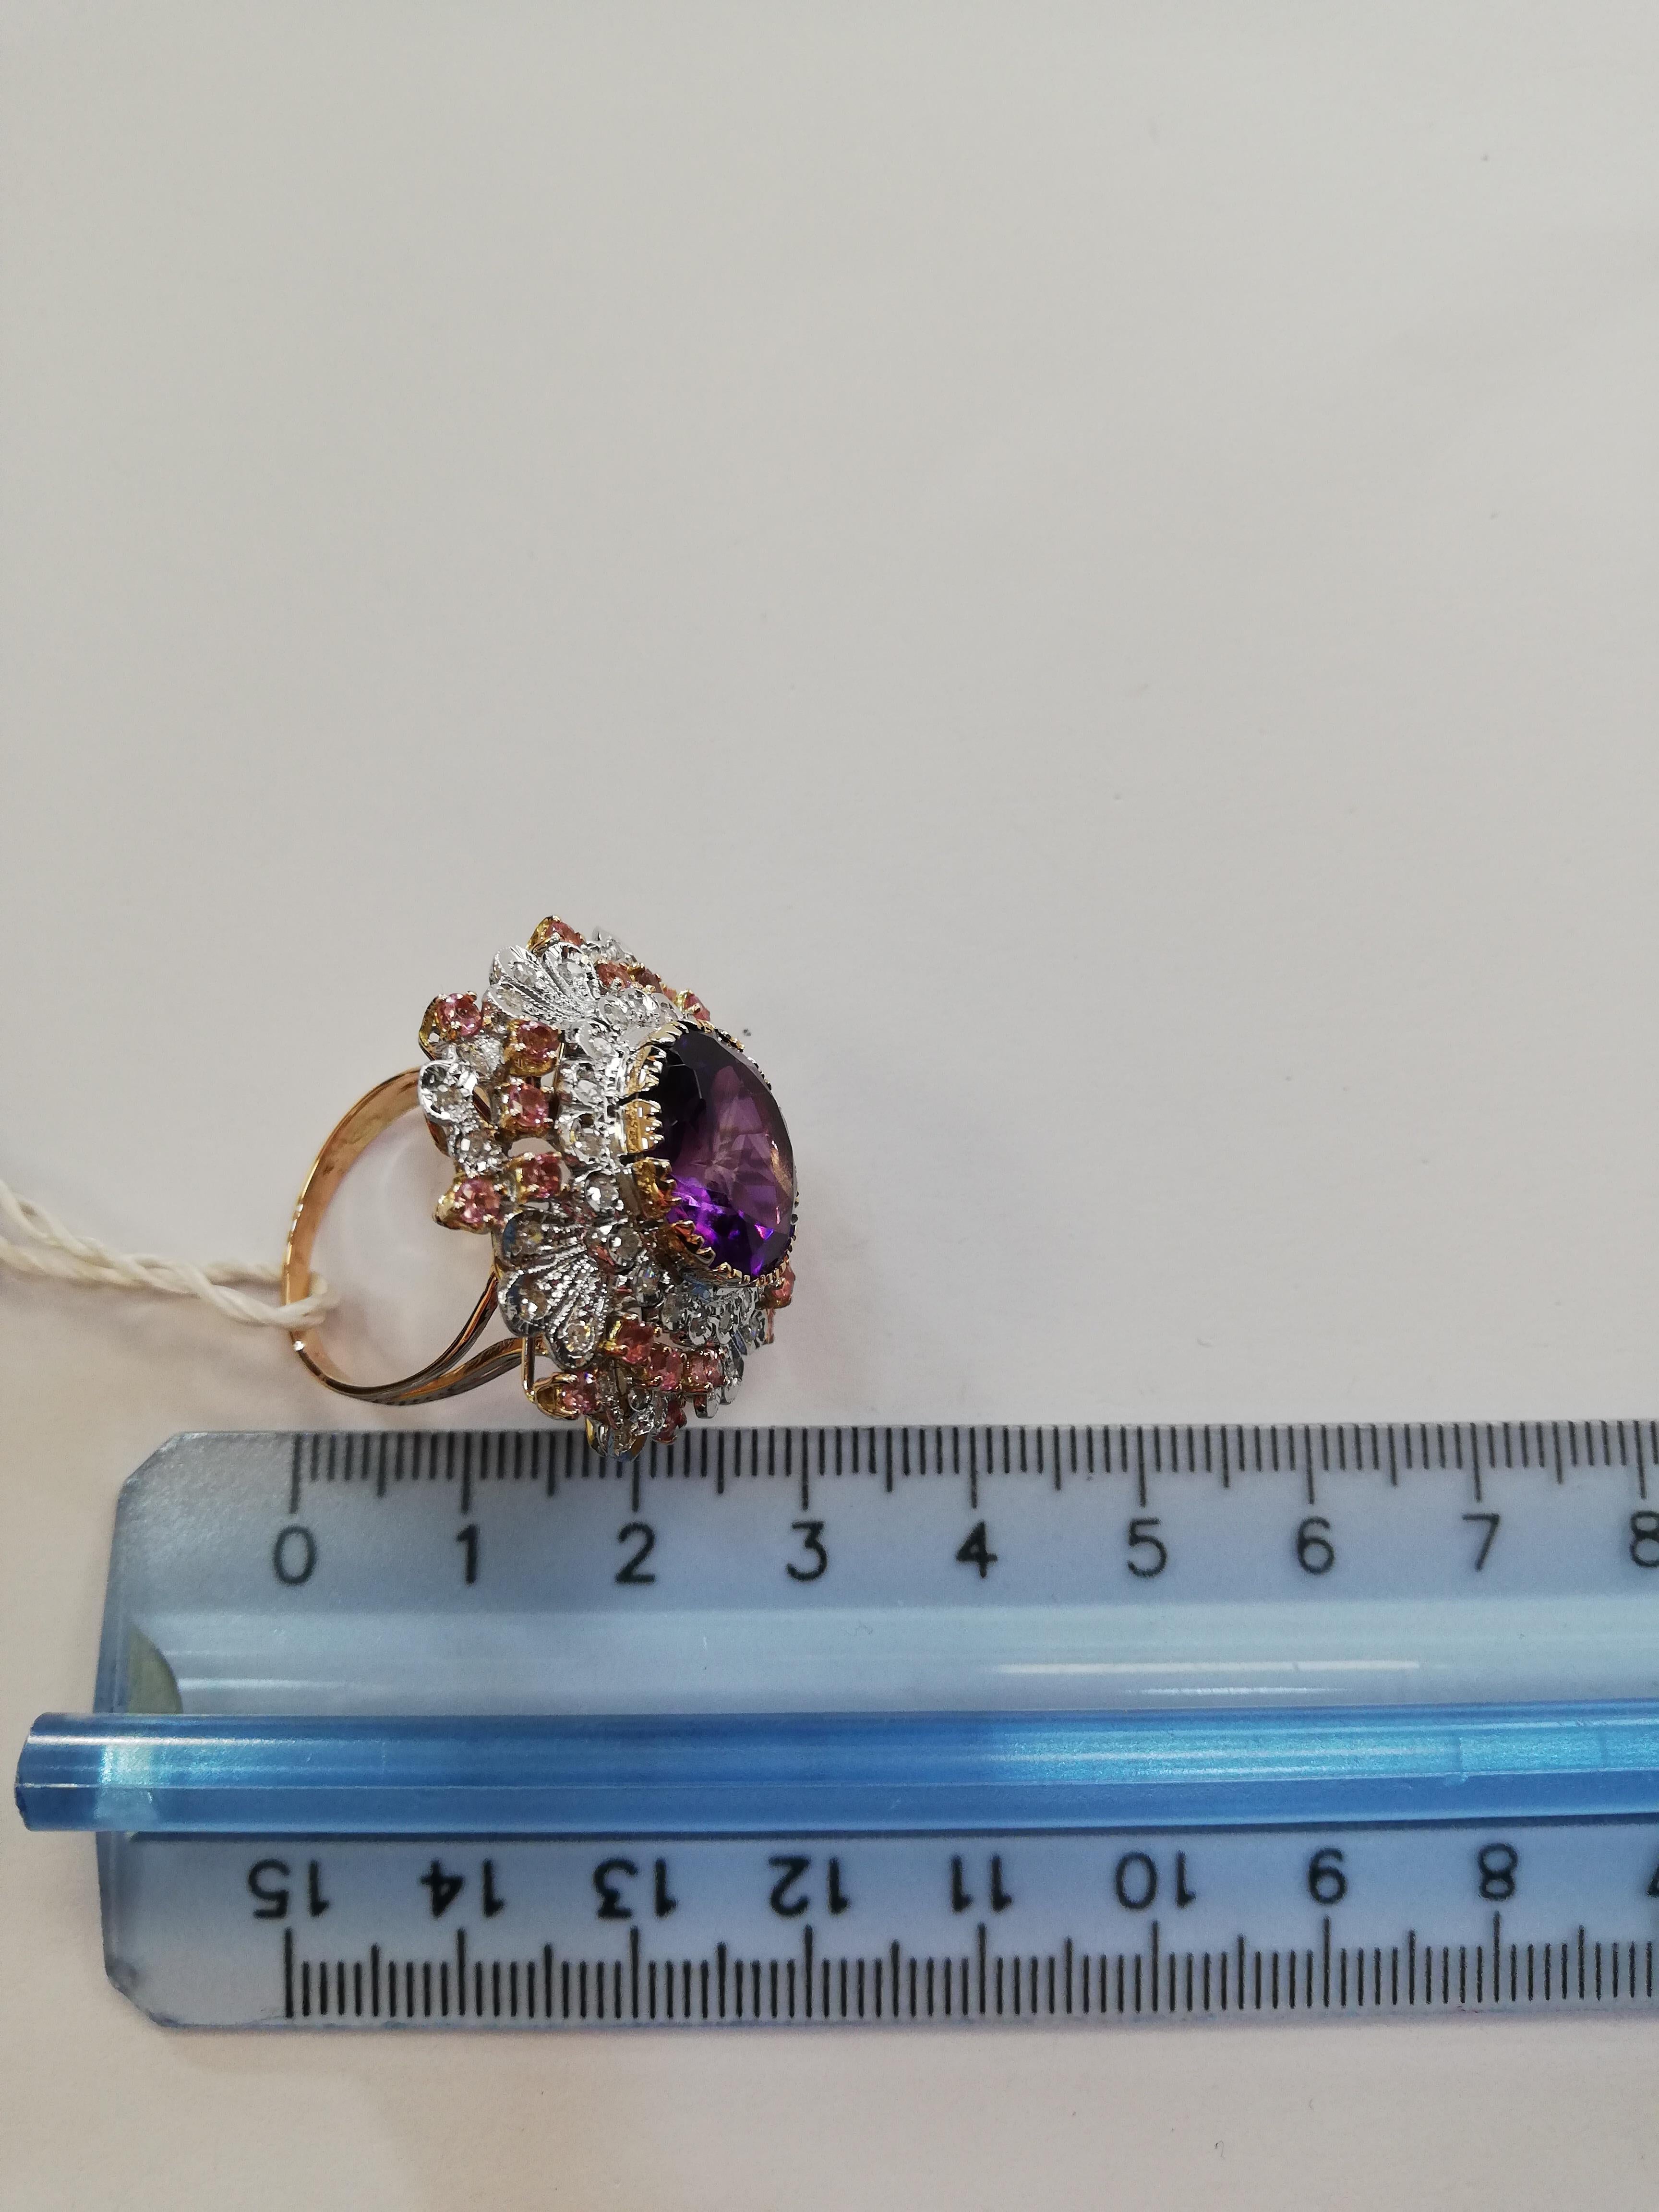 Central Amethyst, Diamonds, Tourmaline, White& Rose Gold Ring For Sale 2